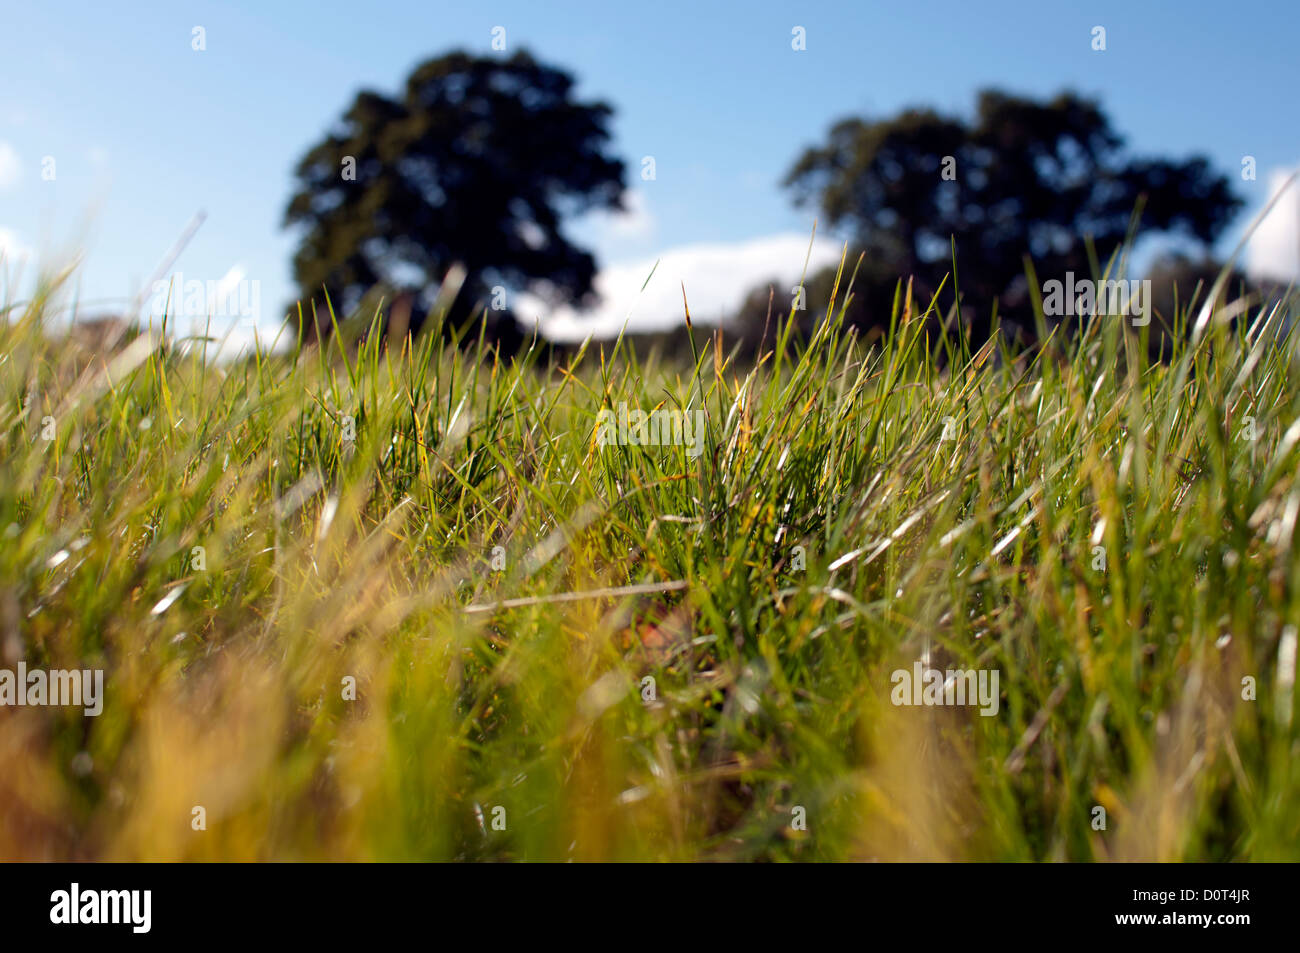 Low level view of grassy field Stock Photo